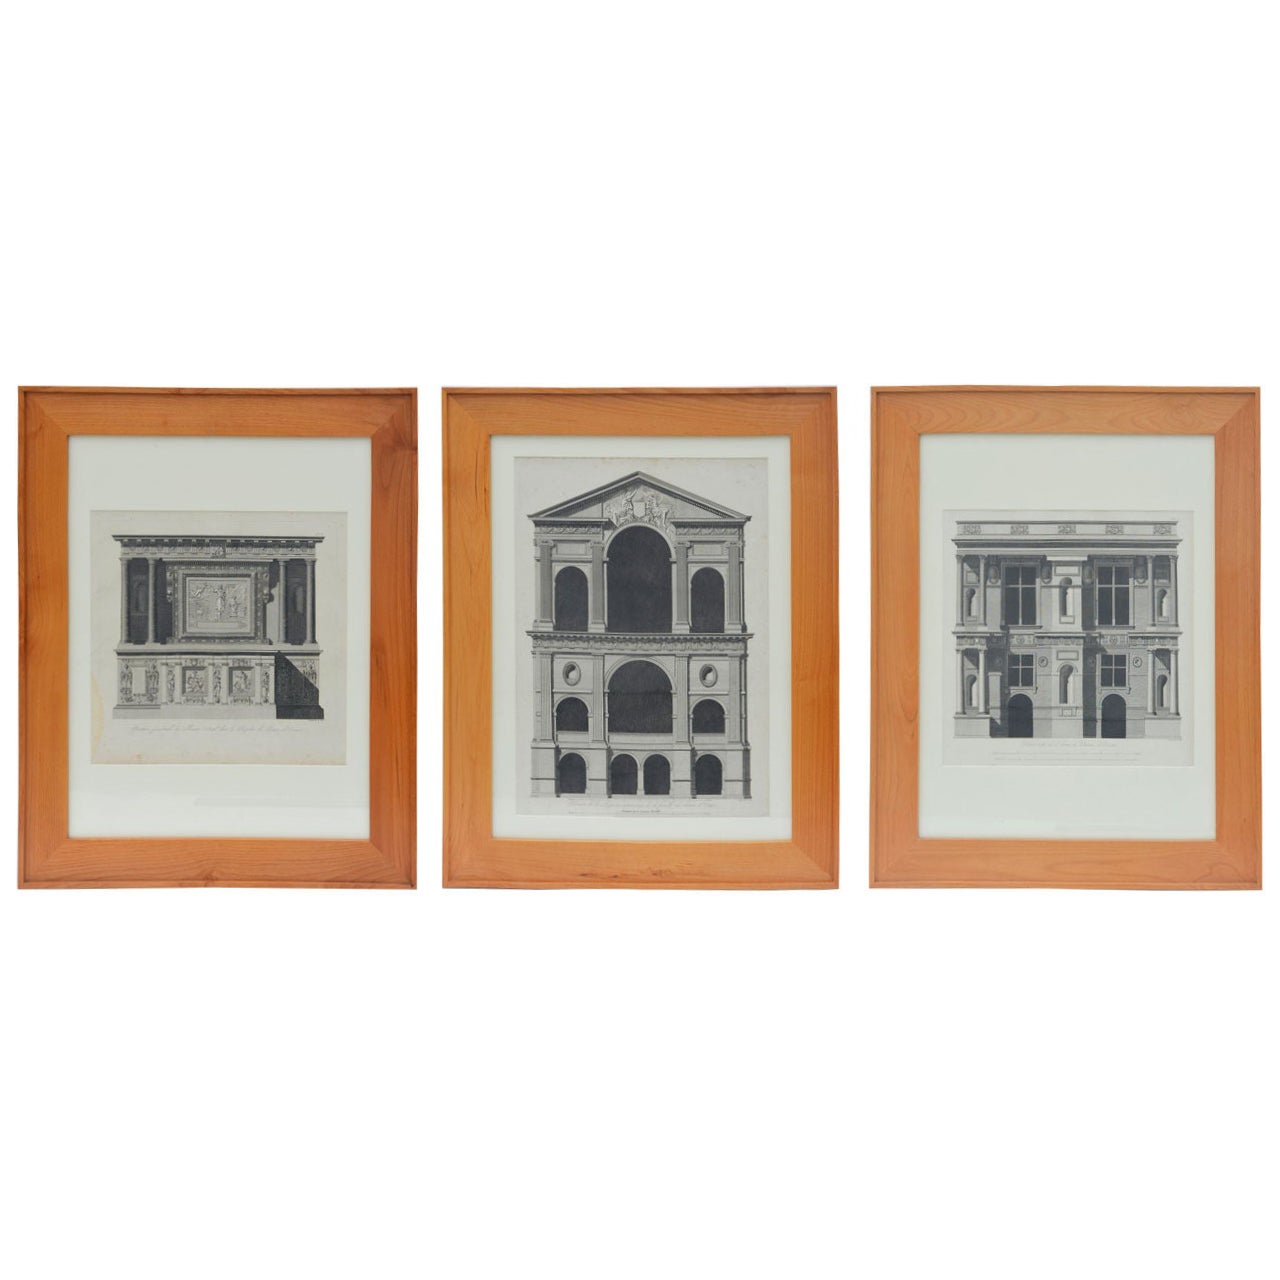 Set of Three Early 19th Century Architectural Prints by Louis-Pierre Baltard de 